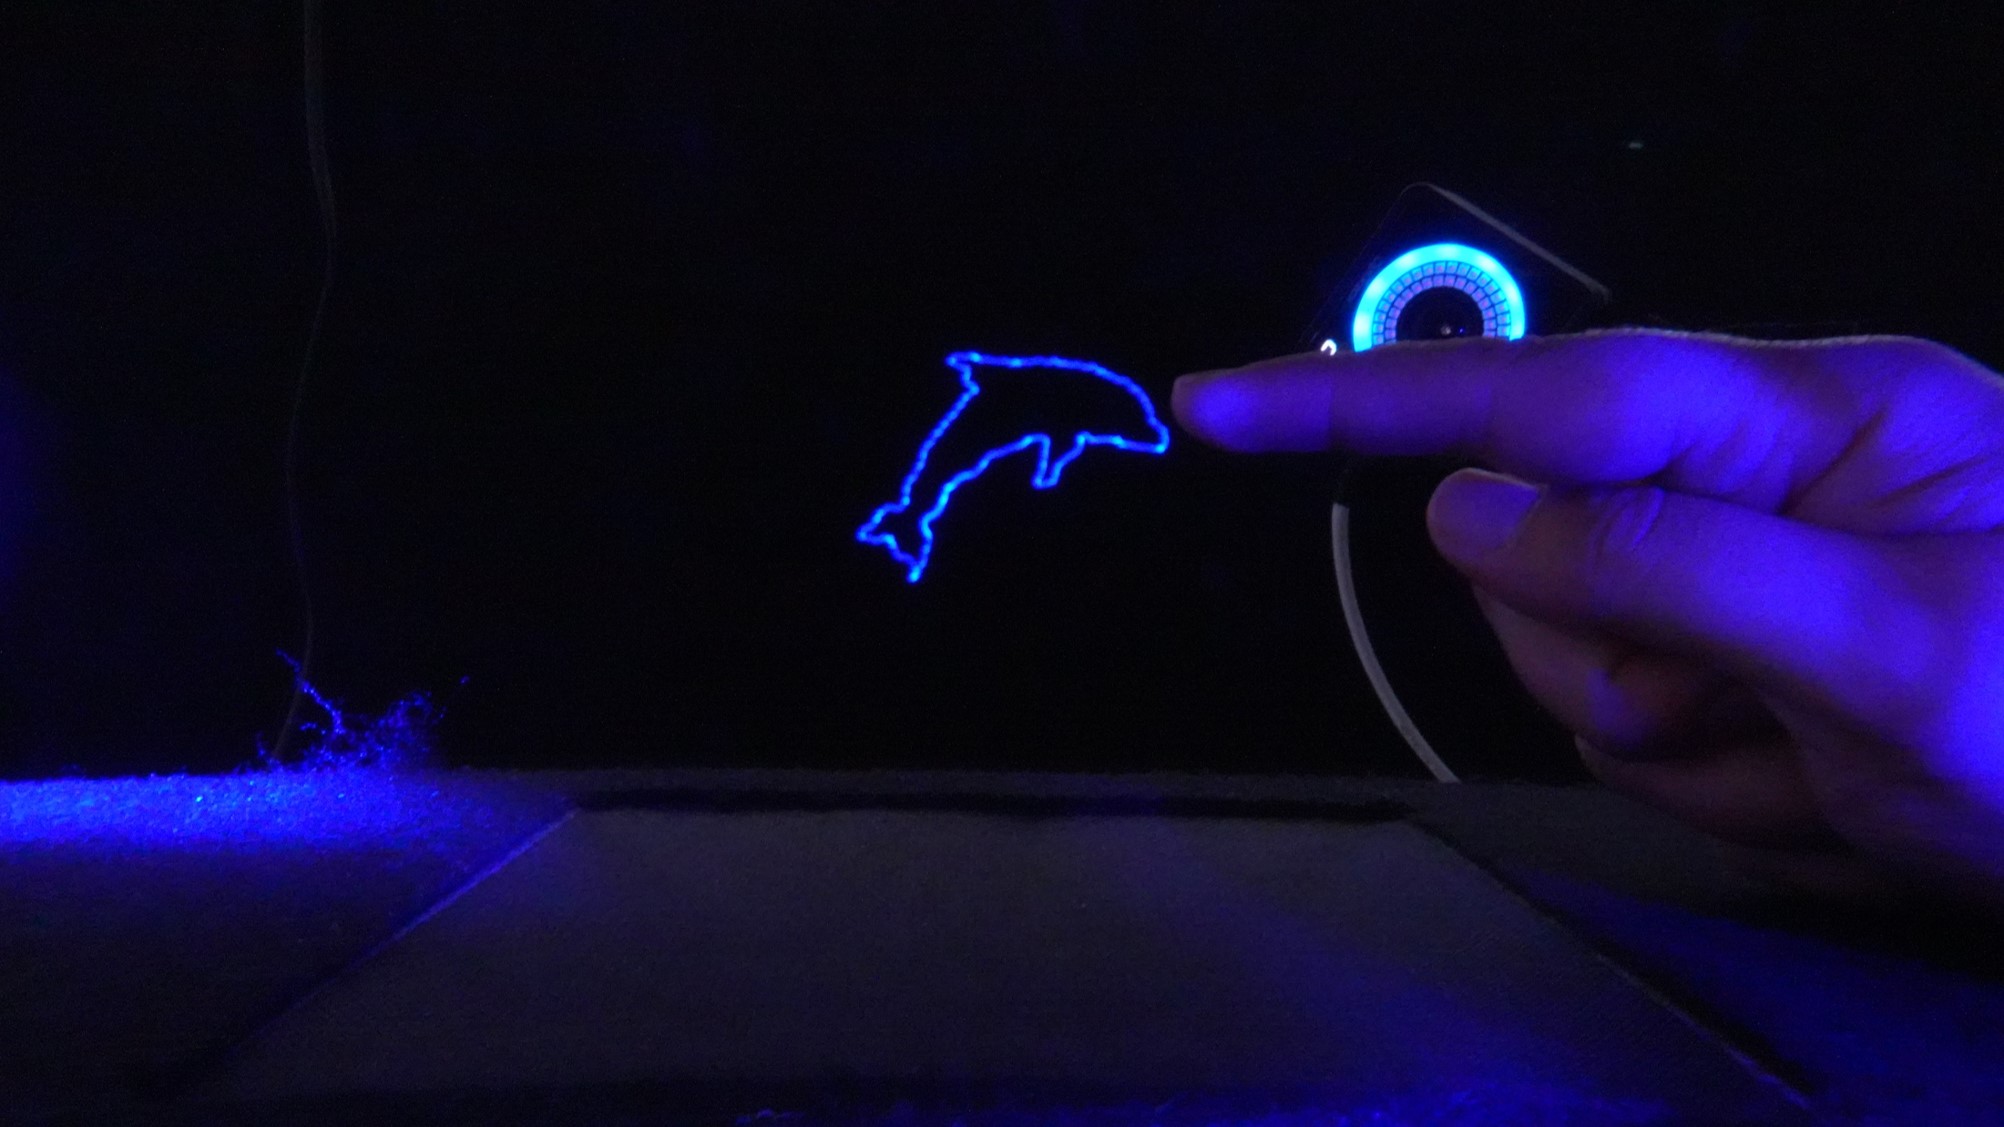 A dolphin shape generated by the ultrasonic levitator.